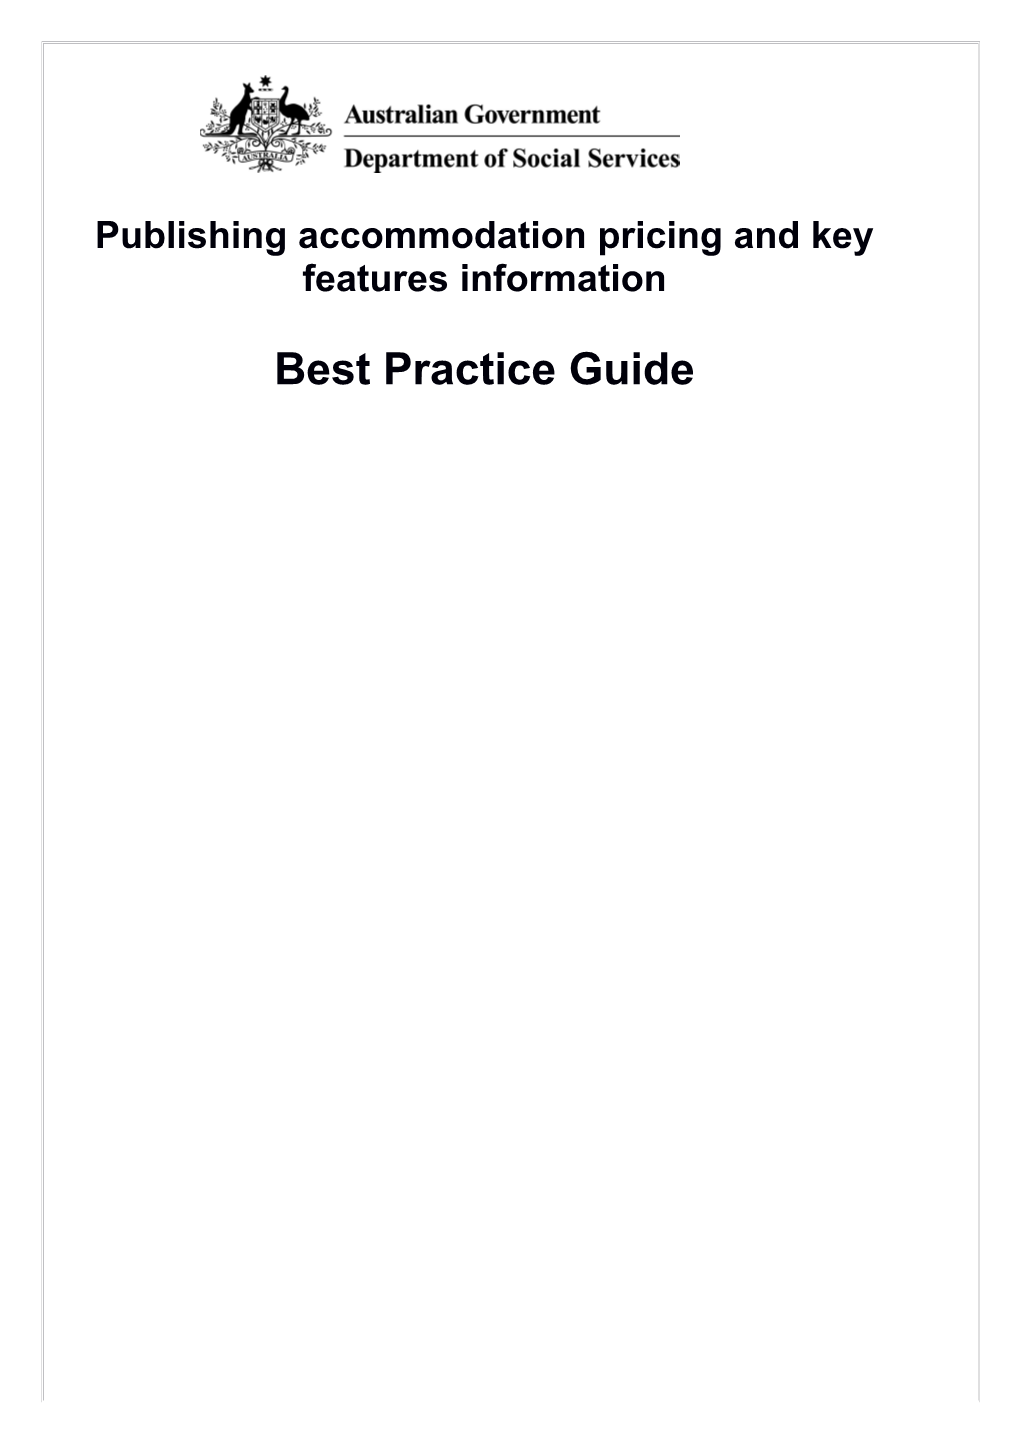 Publishing Accommodation Pricing and Key Features Information Best Practice Guide